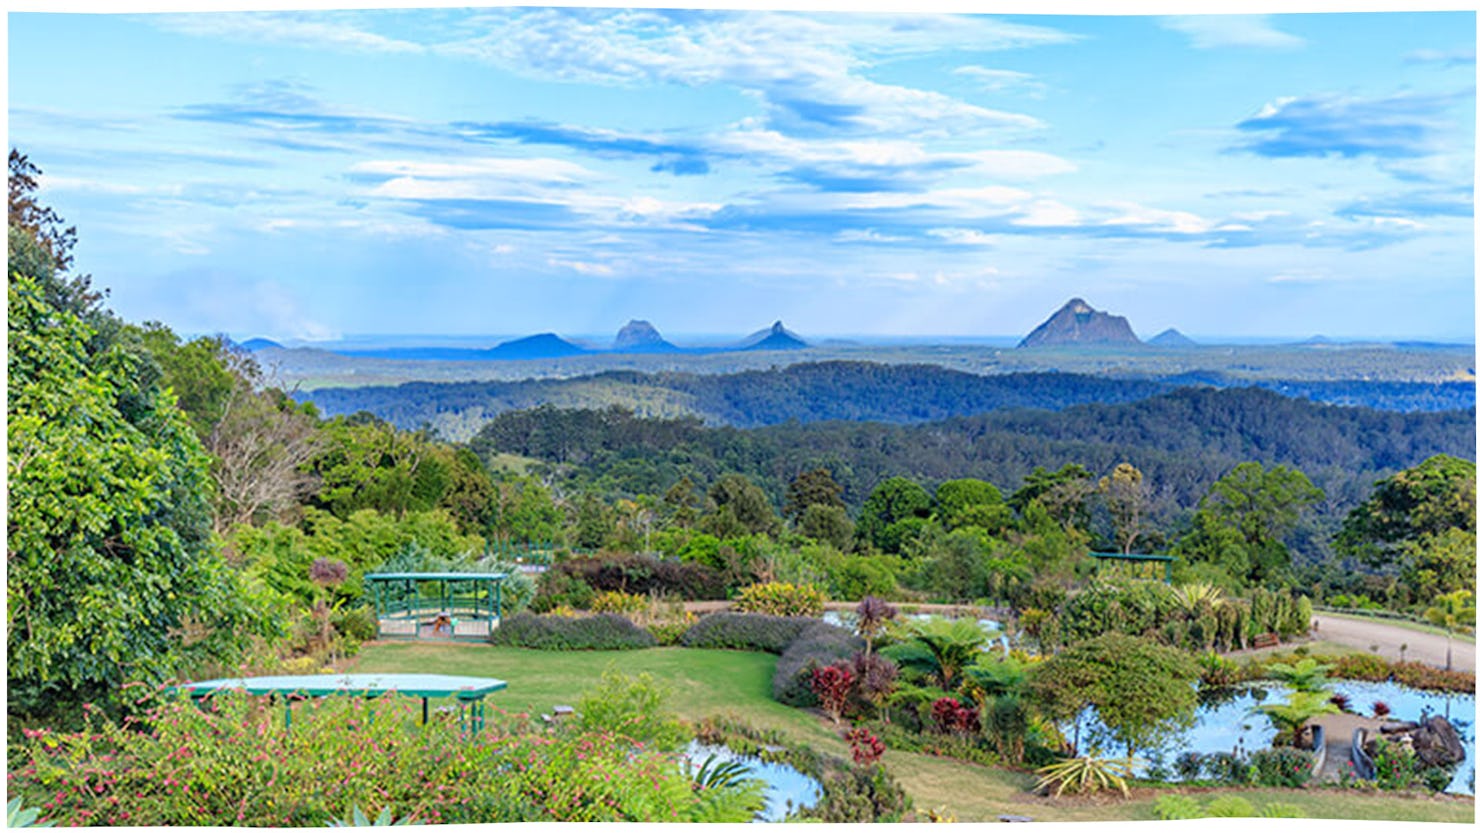 View over the Glass House Mountains. Credit: Jules Ingall